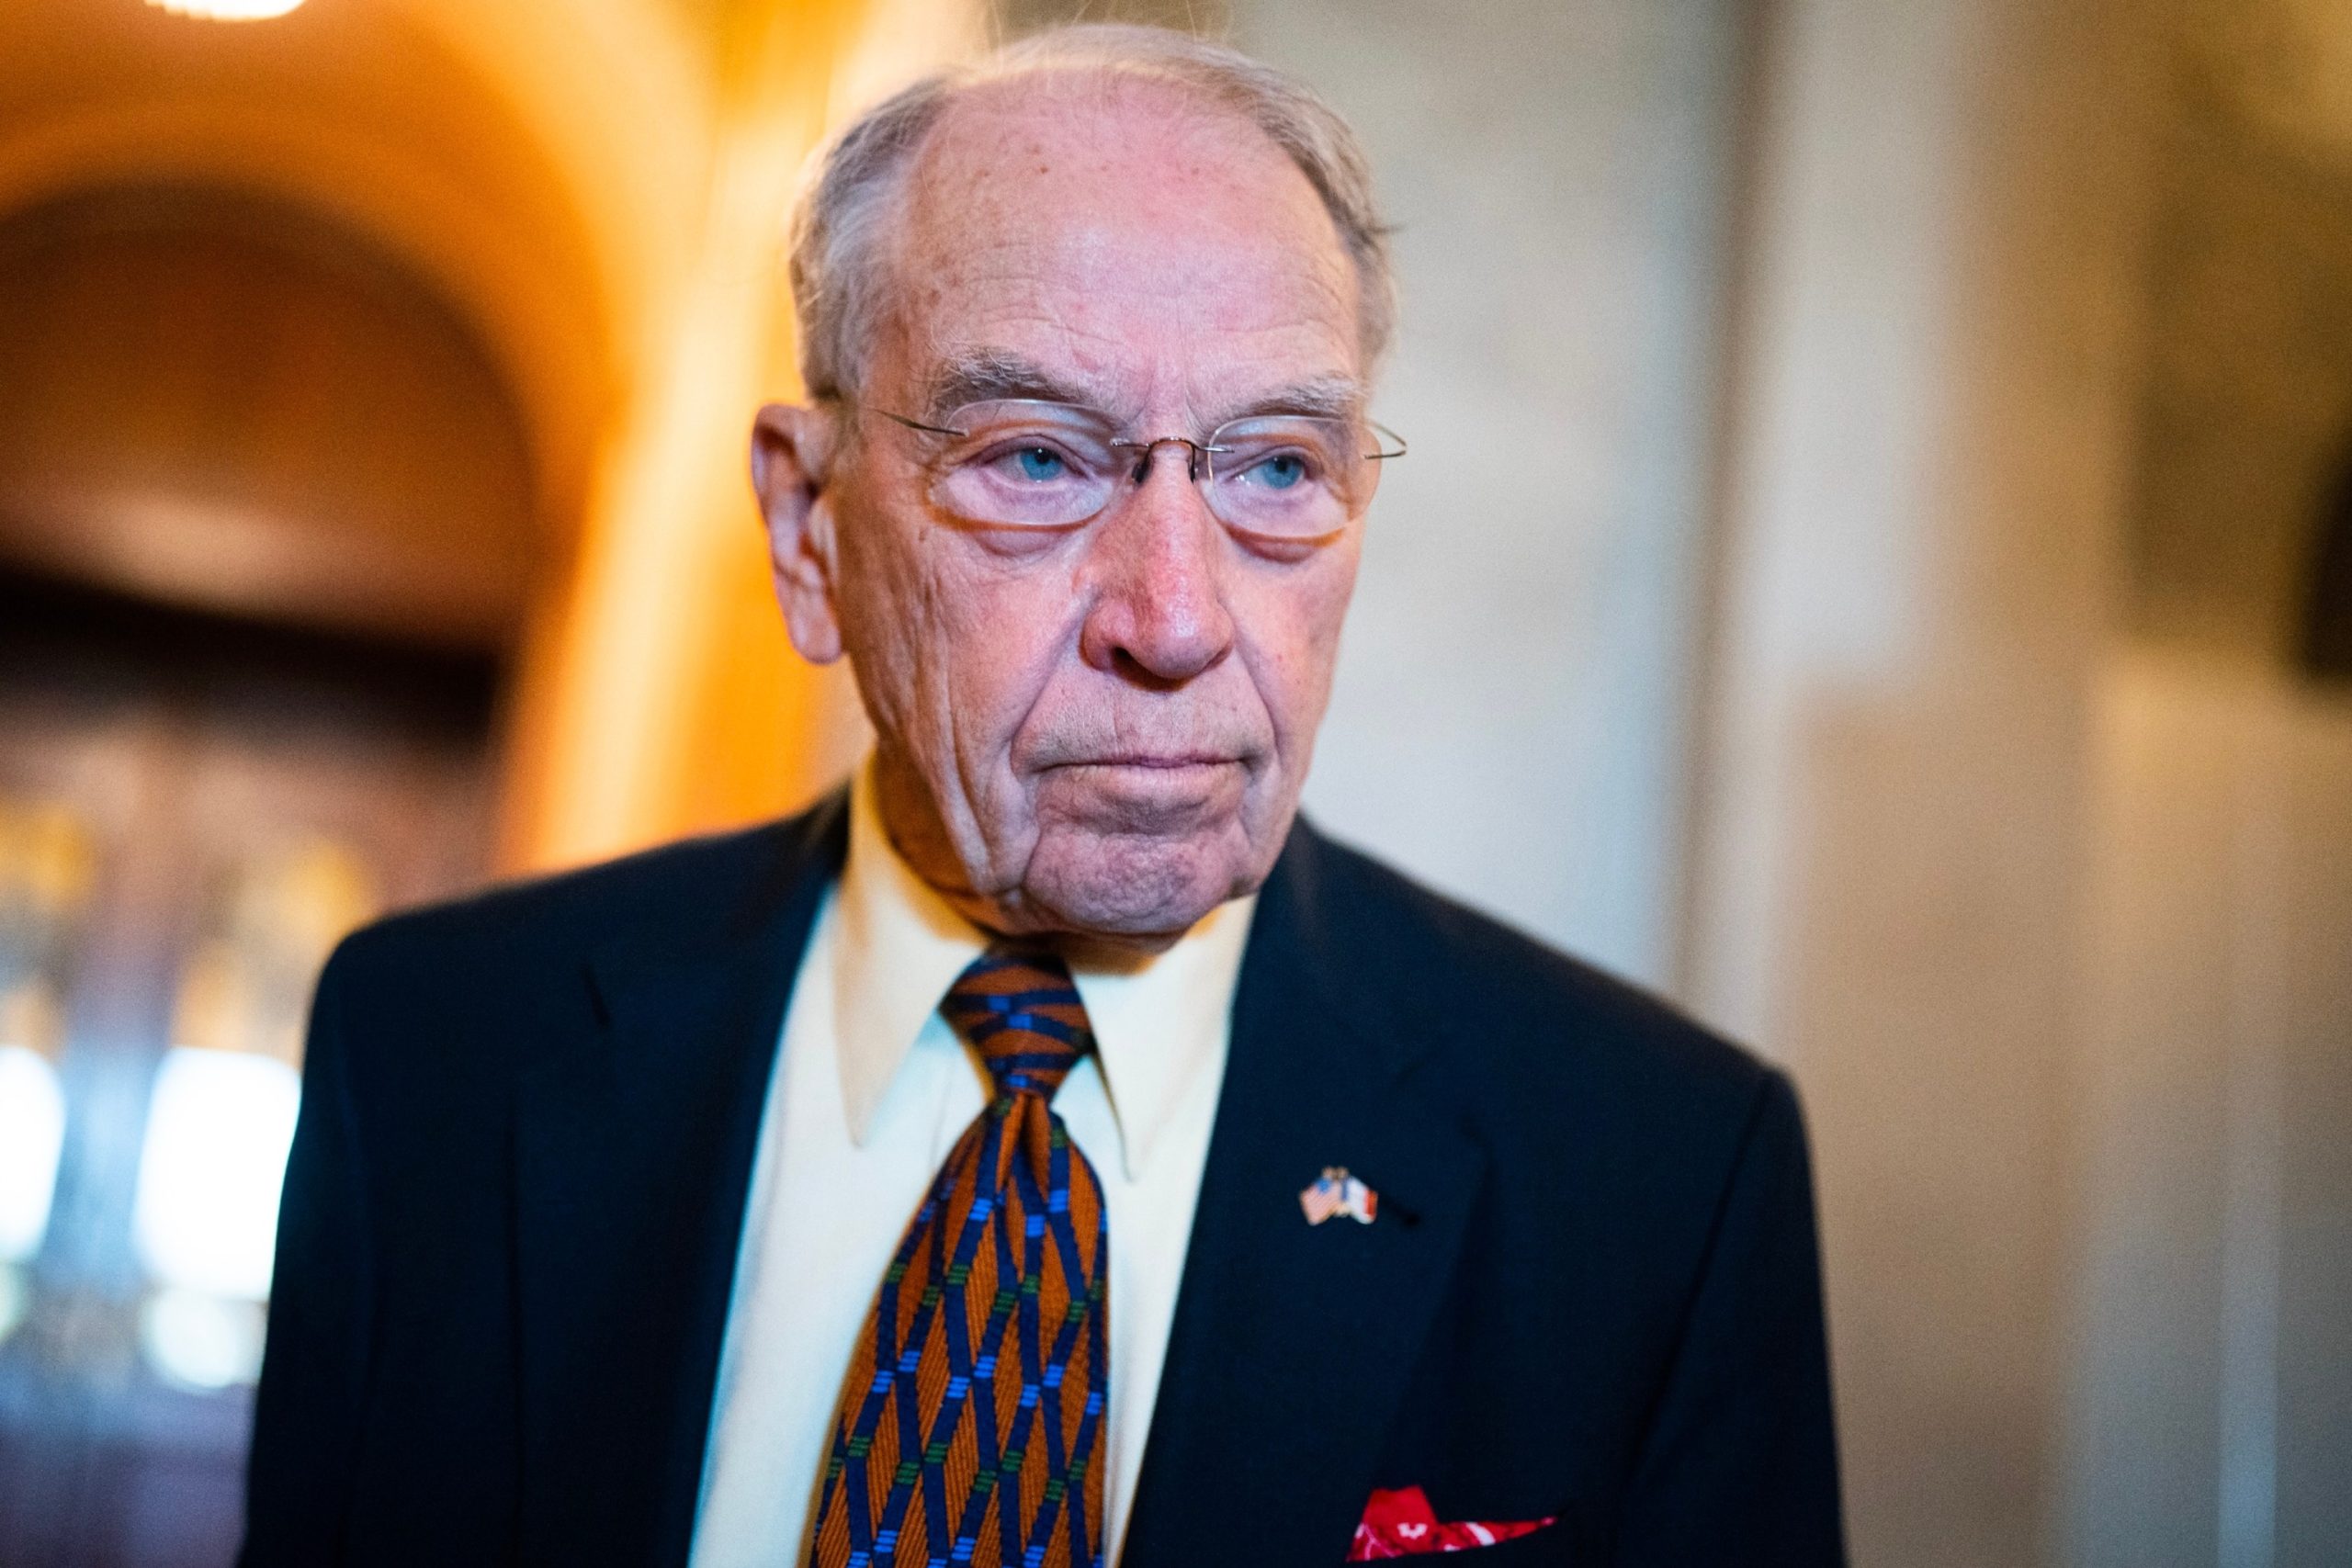 Chuck Grassley, the oldest member of the US Senate, receives treatment for infection, confirms his office